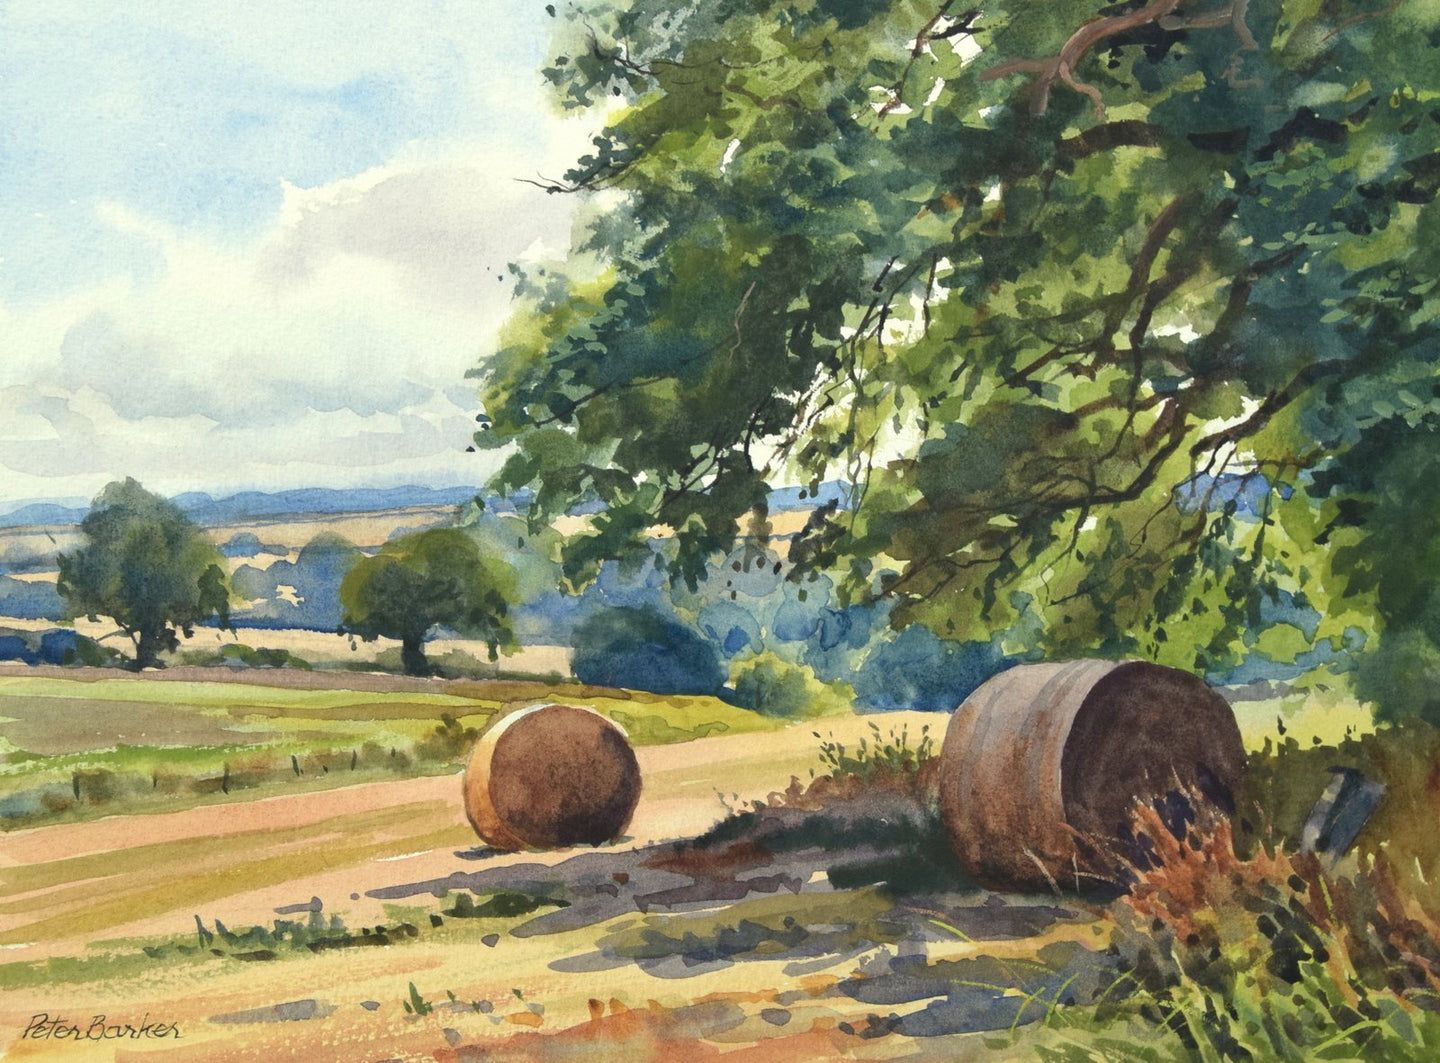 Hay bales at Preston Rutland by Peter Barker, with two round hay bales in the shade of a large tree on the right.